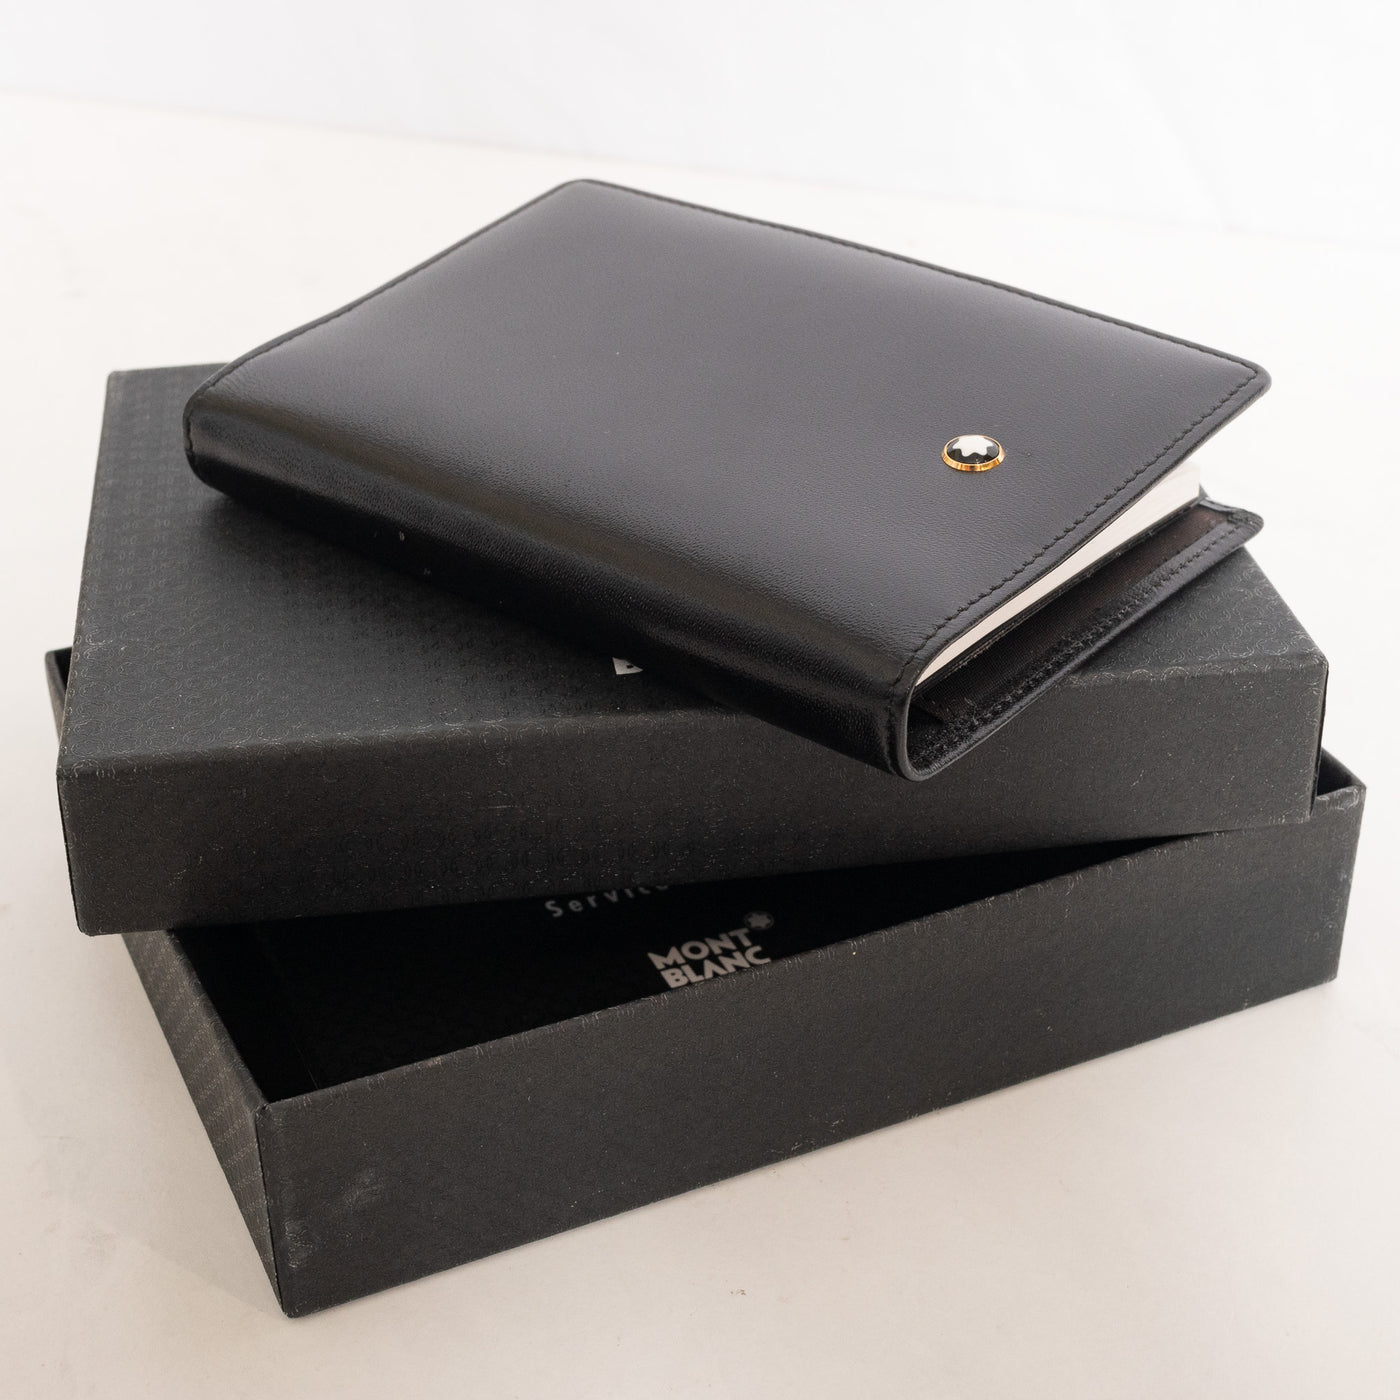 Montblanc Leather Goods Meisterstuck Black Leather Pocket Address Book 3425 - Preowned Box